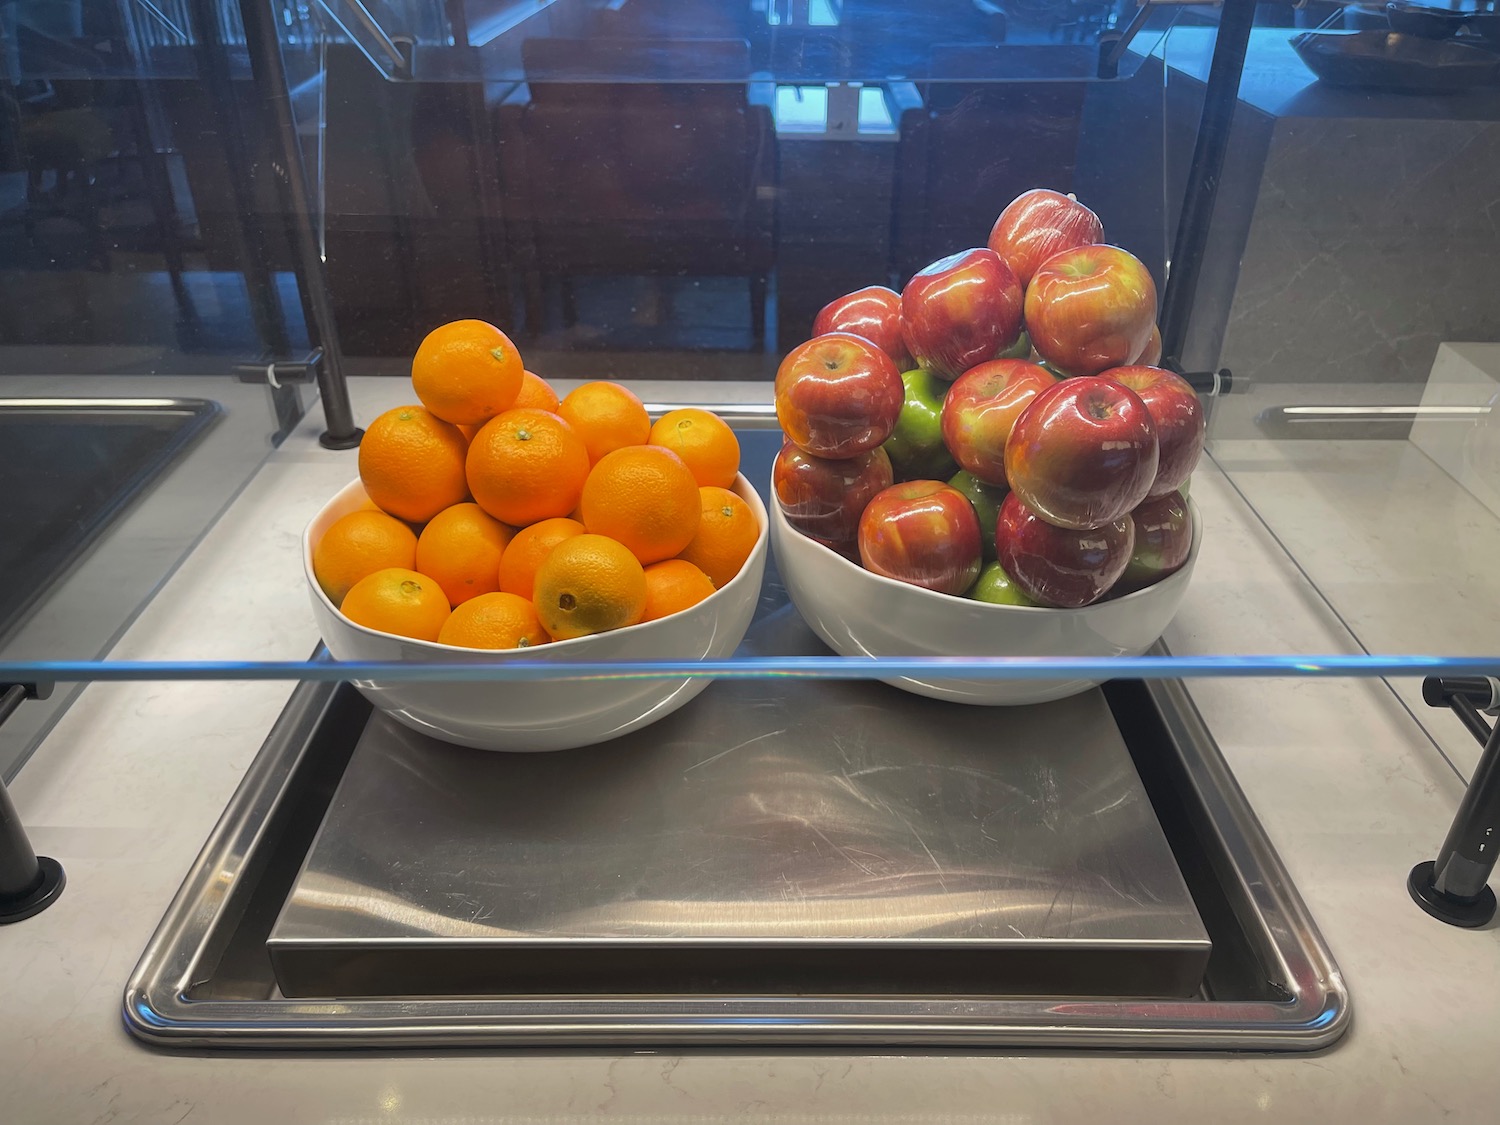 a bowl of apples and oranges on a counter